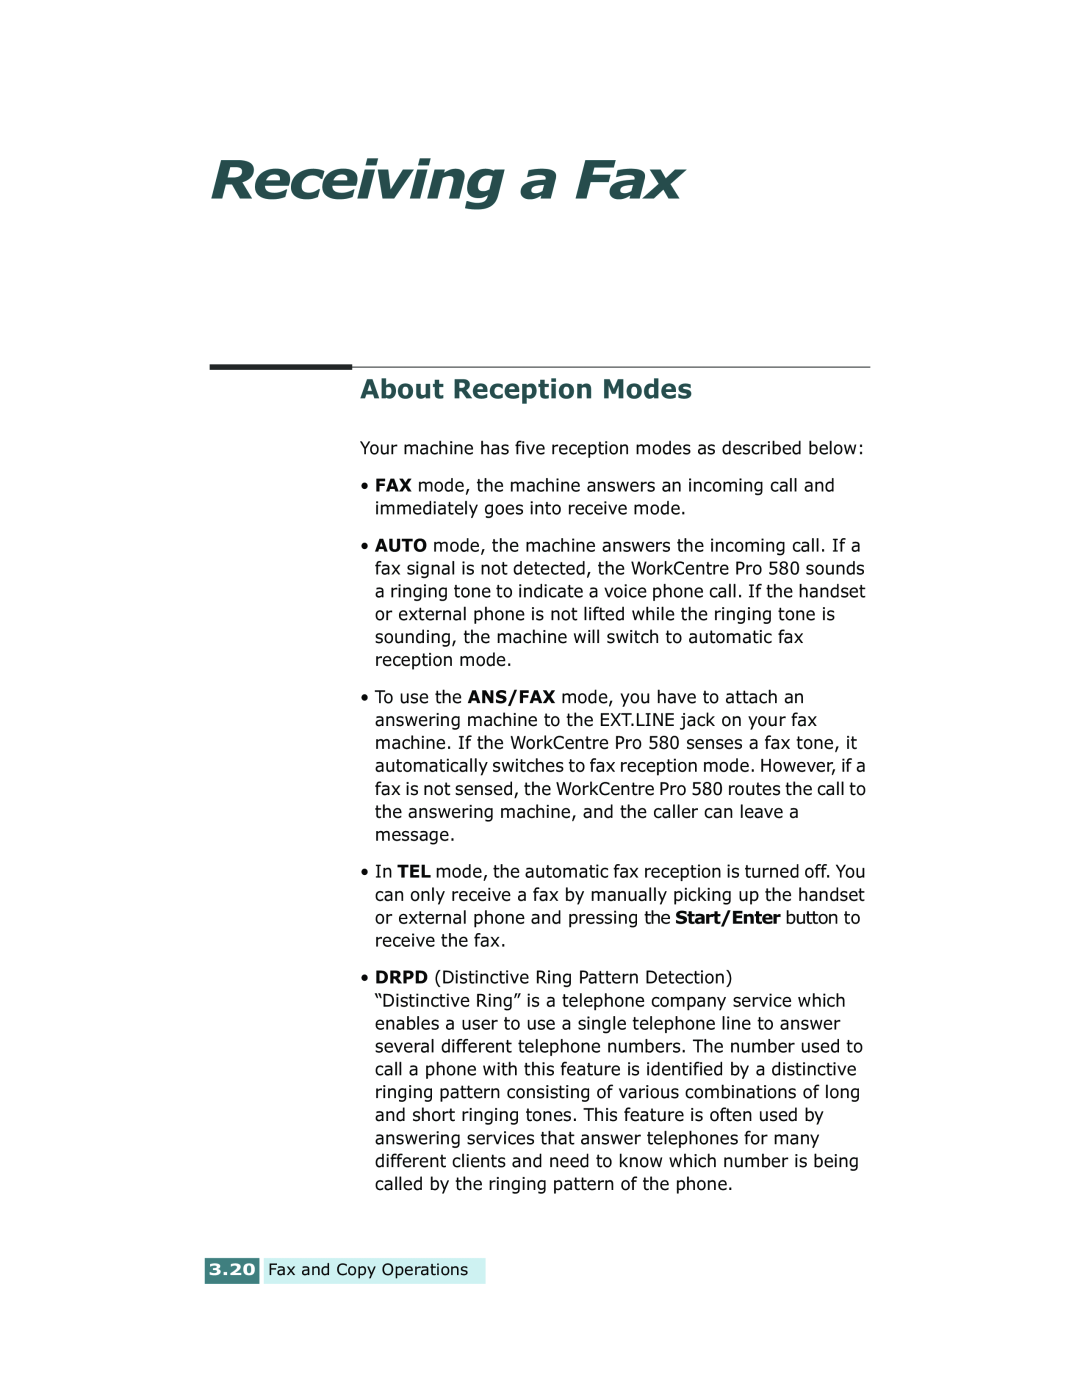 Xerox Pro 580 manual Receiving a Fax, About Reception Modes 